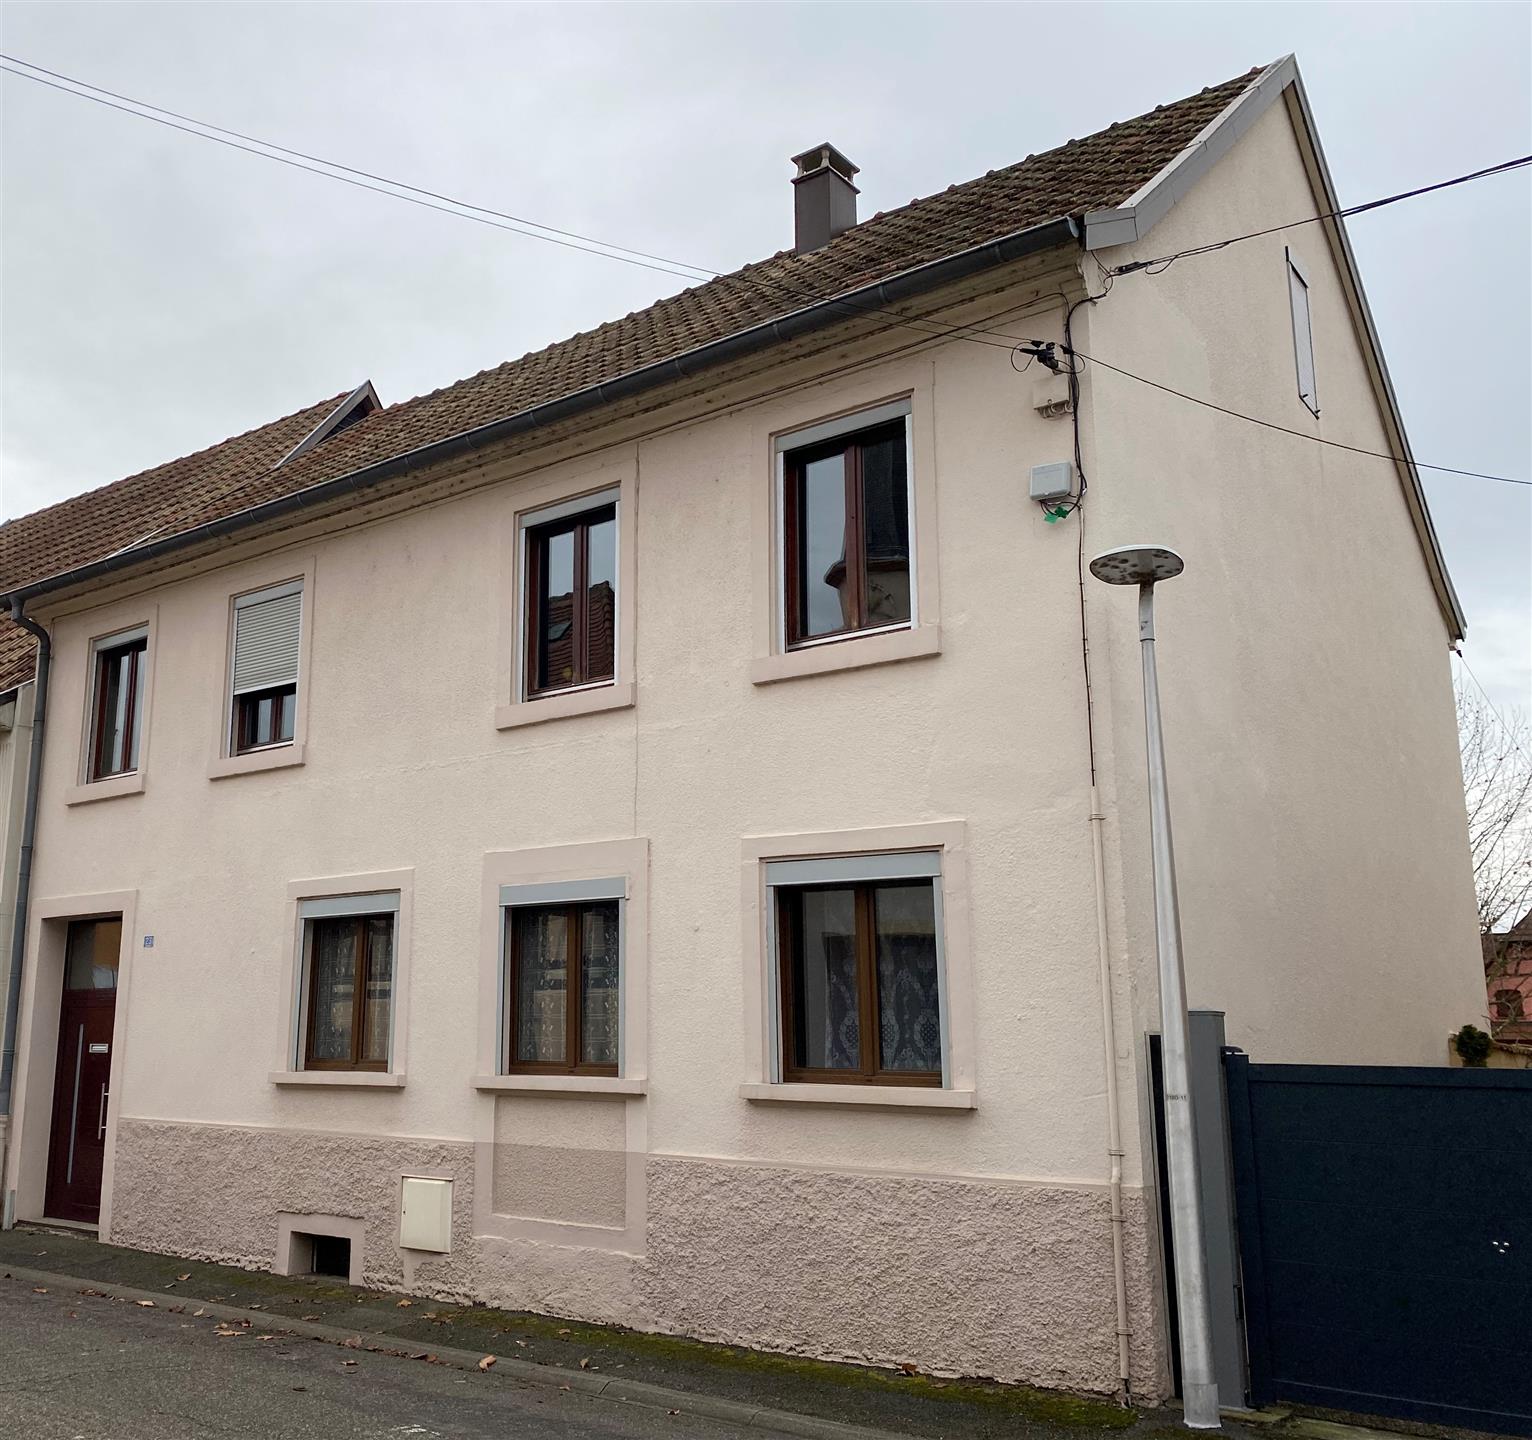 House 156m2 consisting of two dwellings in Biesheim